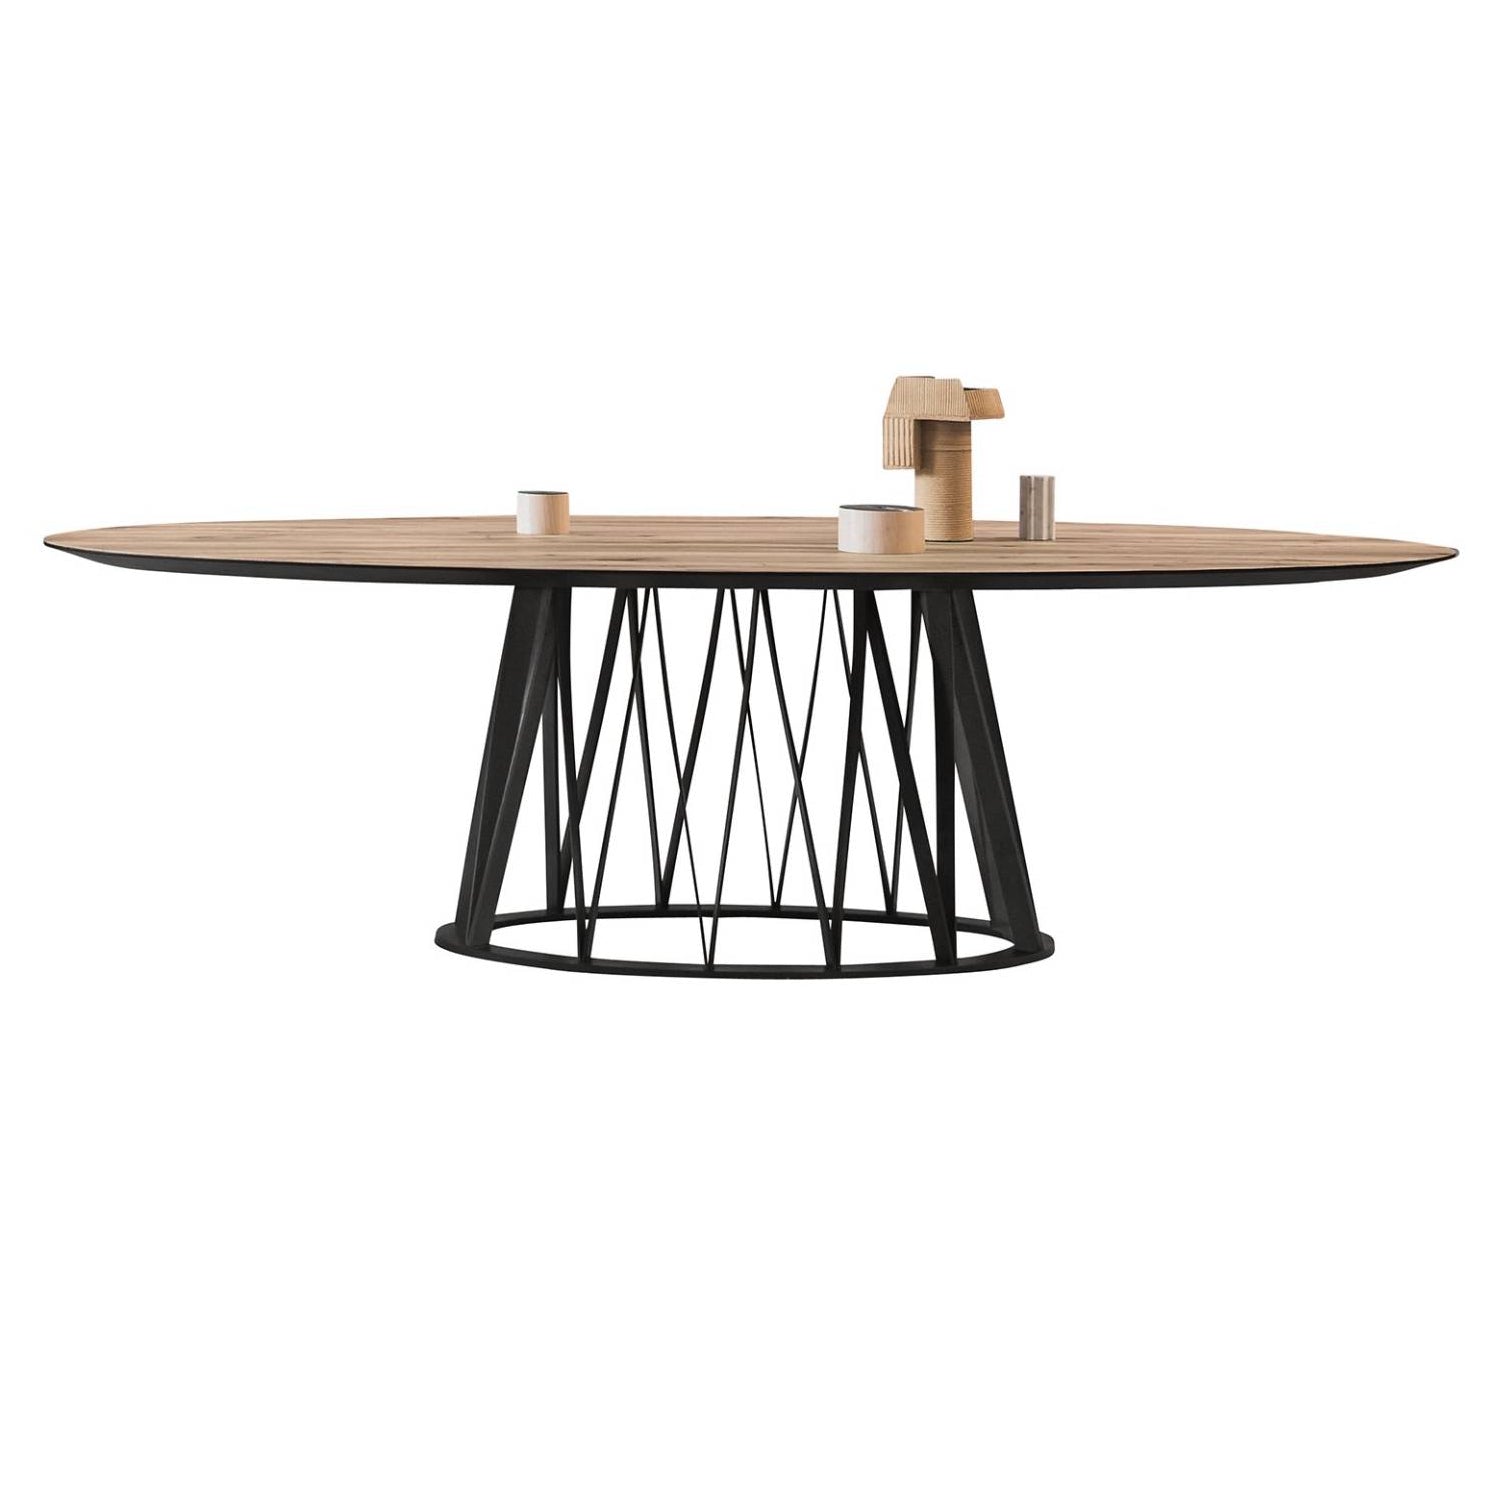 Acco Oval Dining Table: Large + Canaletto Walnut + Black Ash